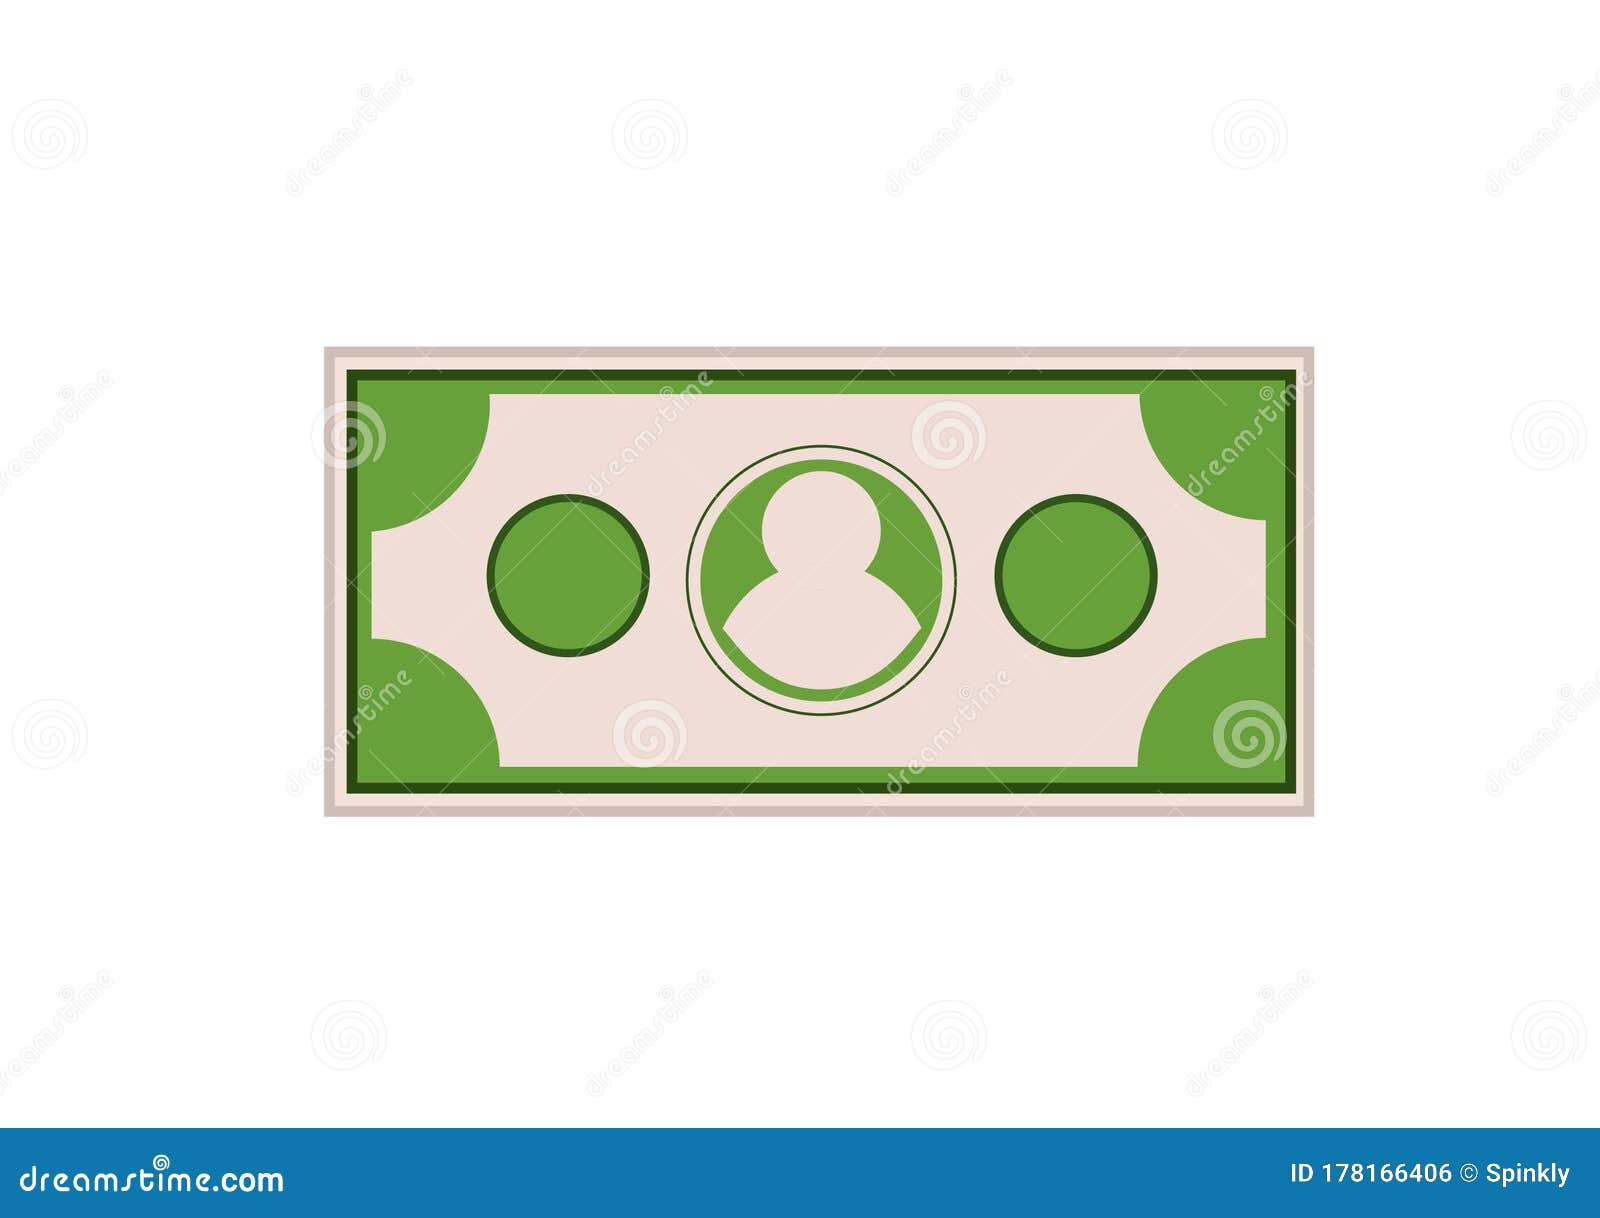 Money Vector Illustration for Use with Designs Stock Vector ...